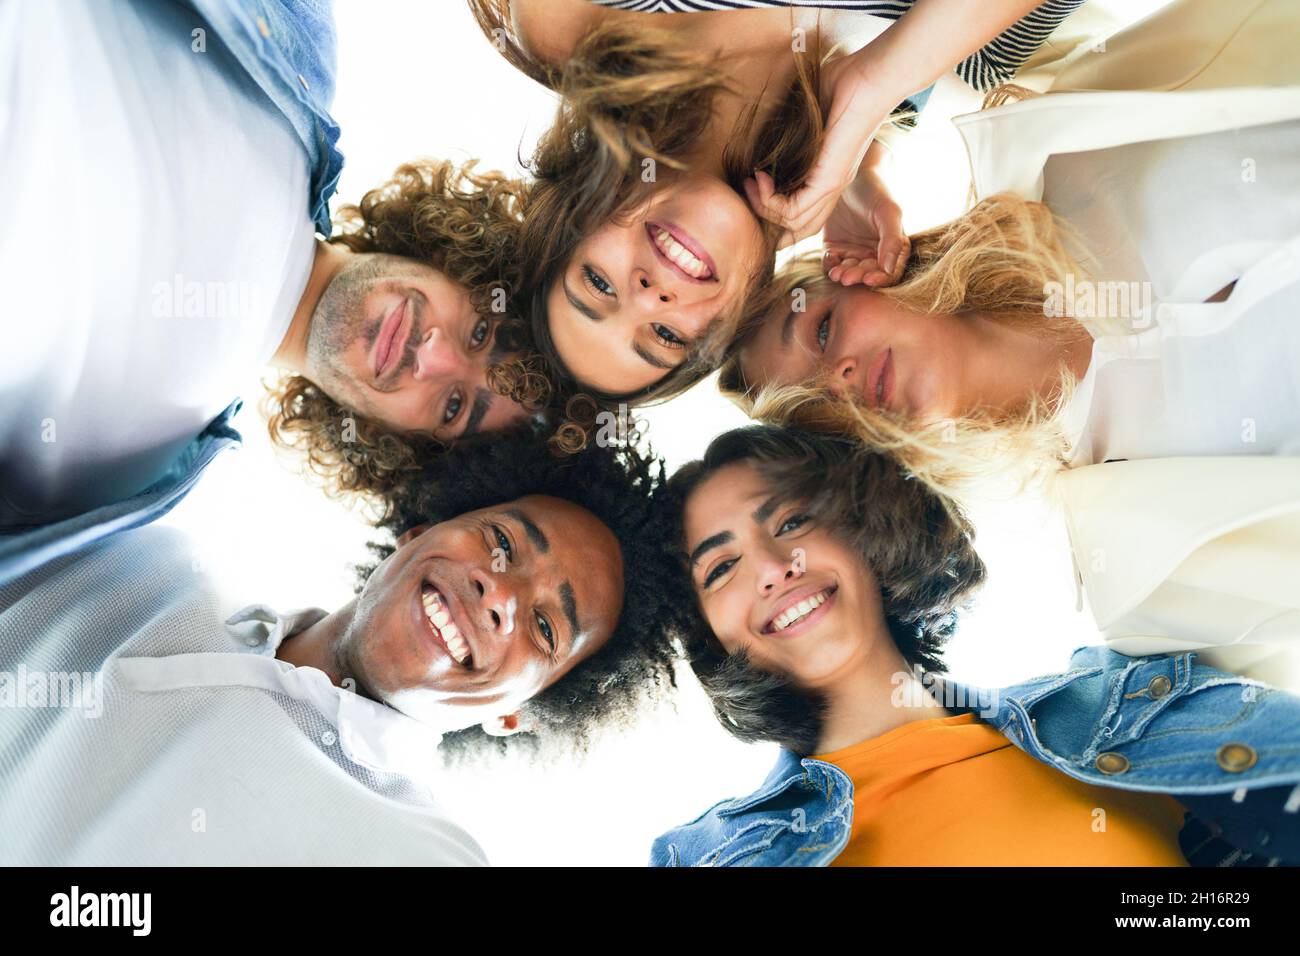 Multi-ethnic group of friends with their heads together in a circle. Stock Photo